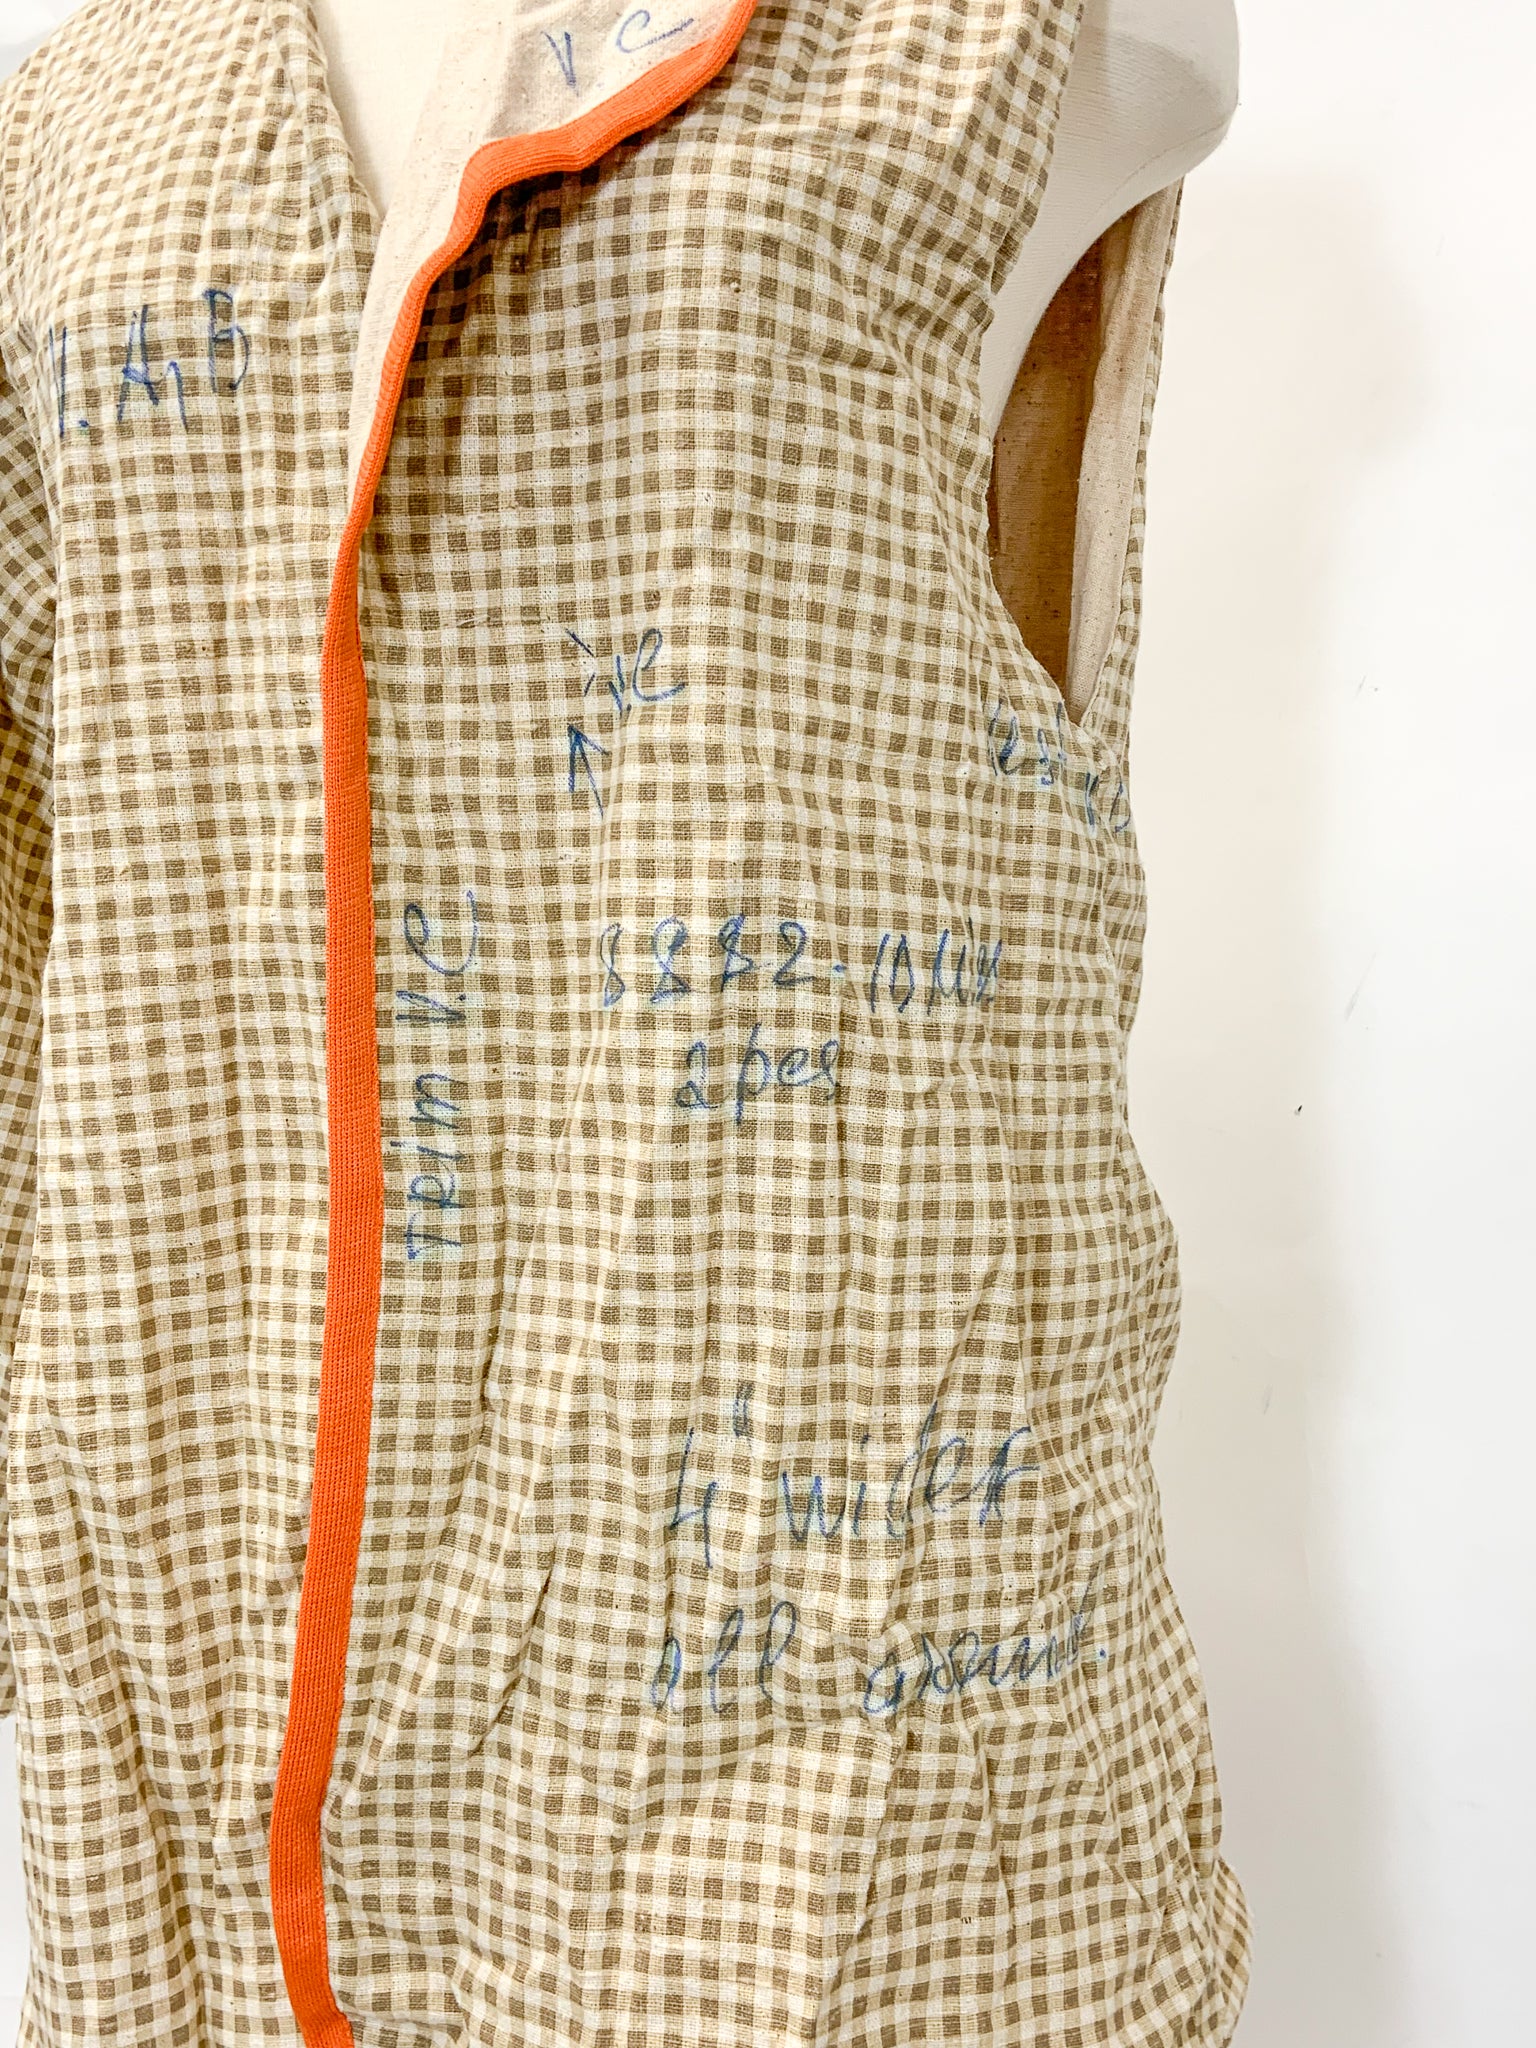 close up of front showing writing on the fabric in blue